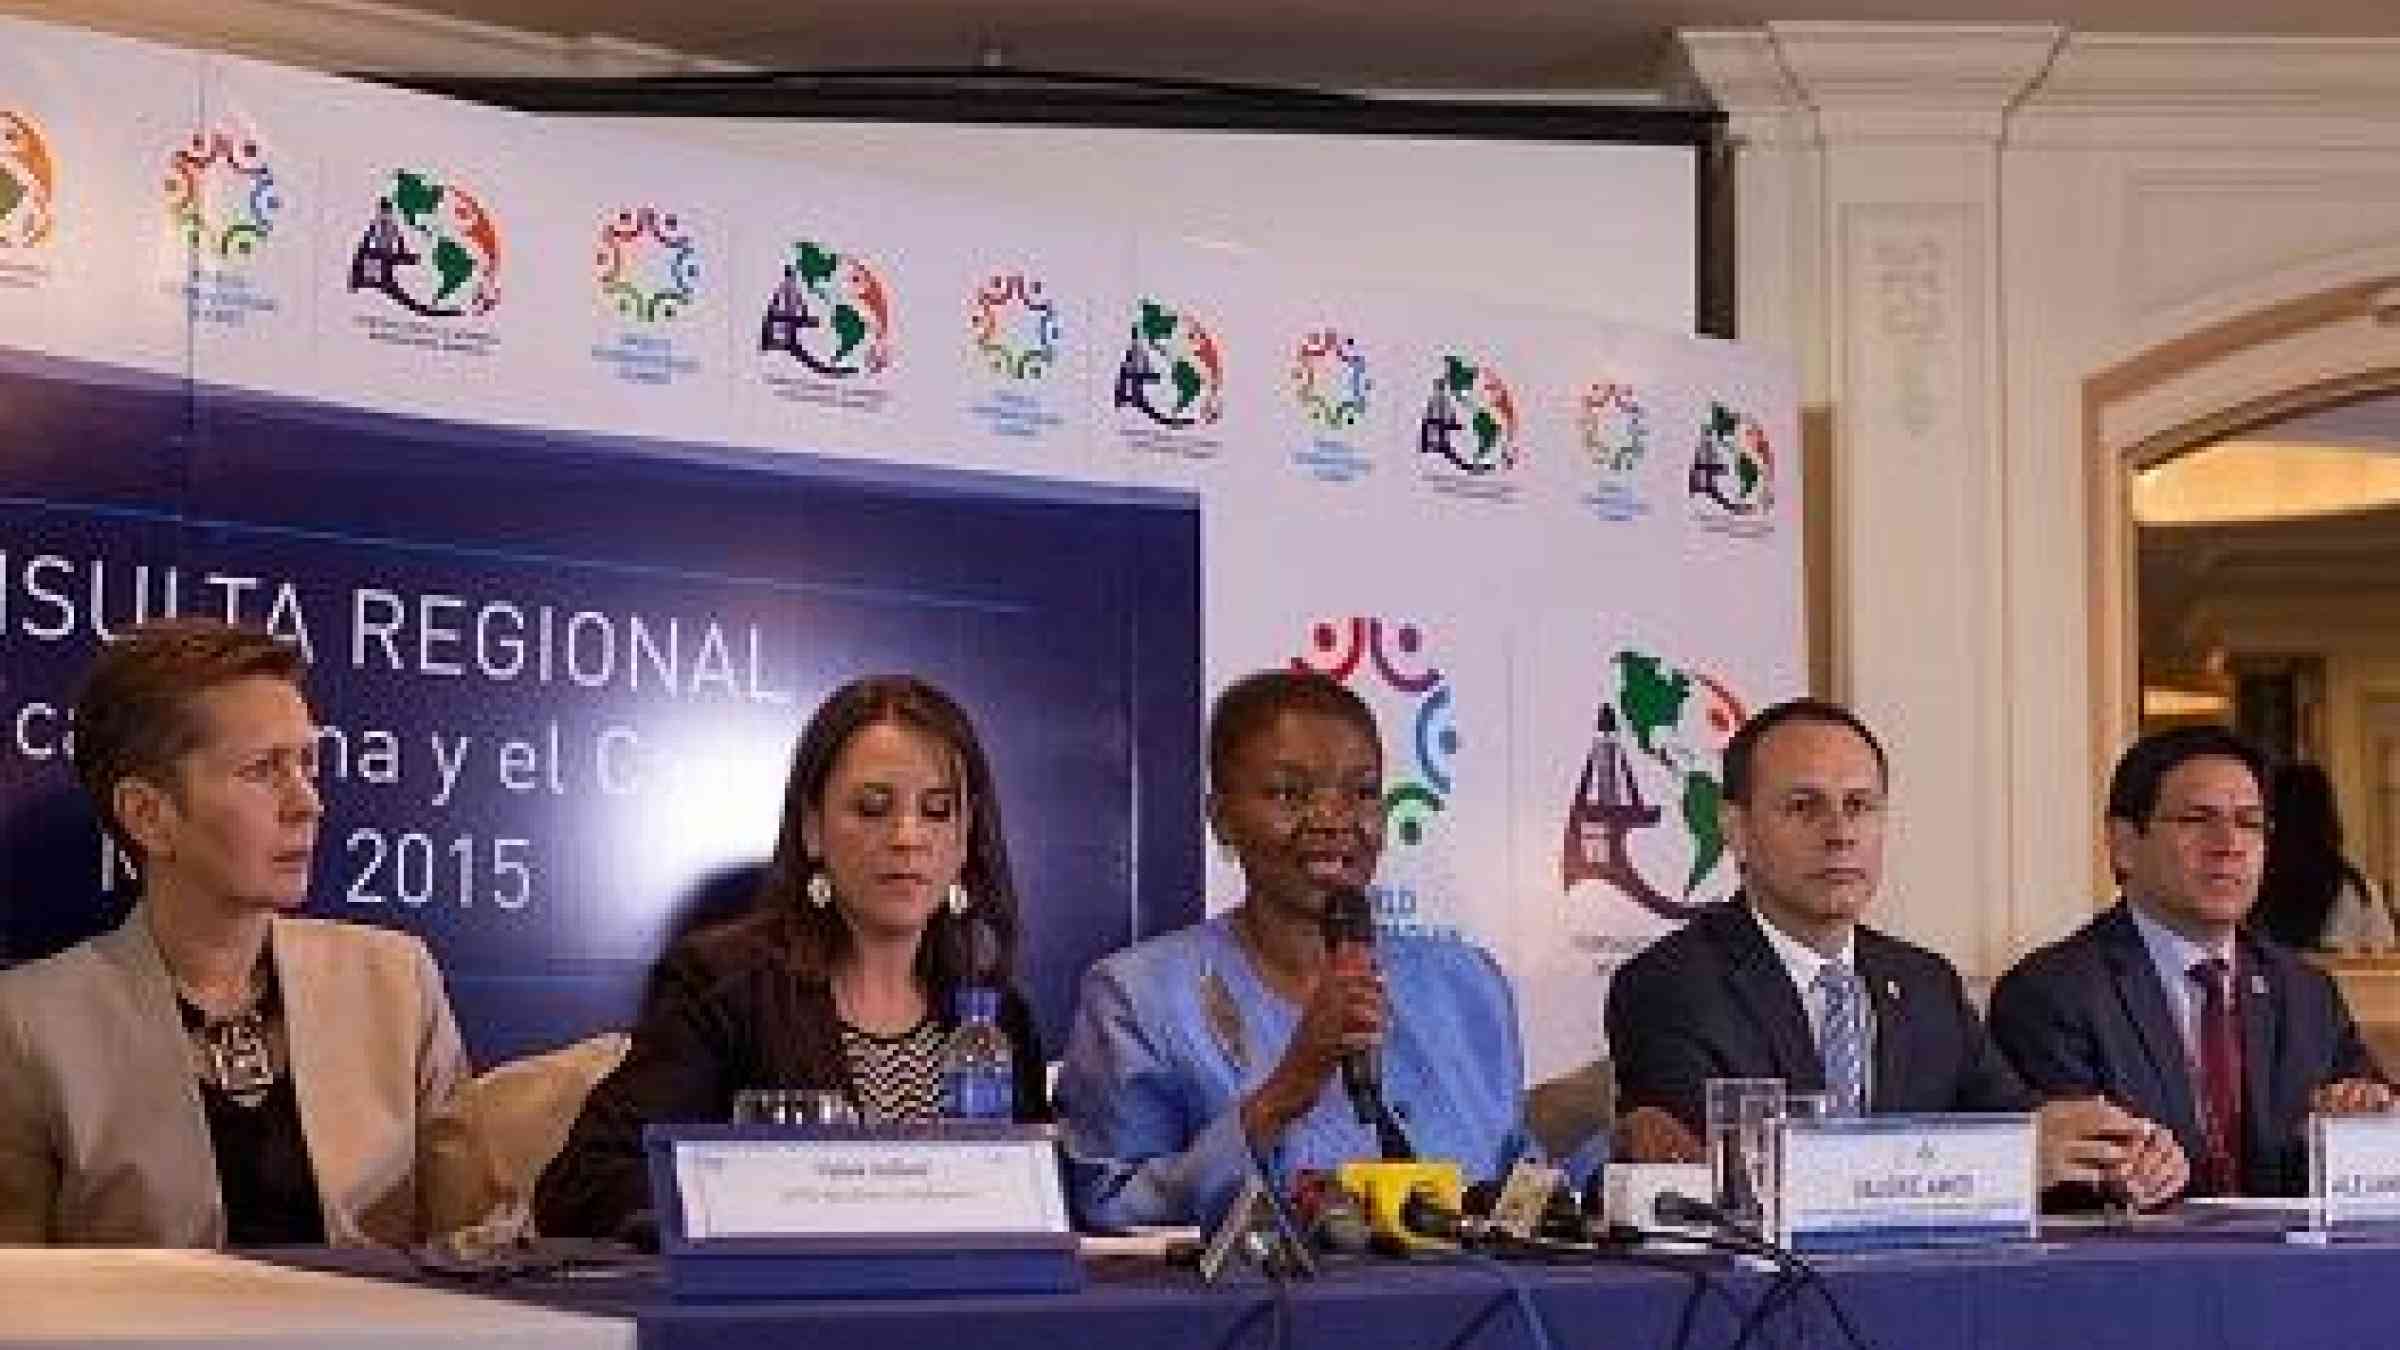 Press Conference on the Declaration of Guatemala by (from left to right) the United Nations Resident Coordinator in Guatemala Valerie Julliand; unidentified interpreter; UN Under-Secretary-General for Humanitarian Affairs Valerie Amos; Executive Secretary of CONRED Alejandro Maldonado; Latin American Representative for United Nations Office of Humanitarian Affairs Darío Álvarez. (Photo: CONRED)